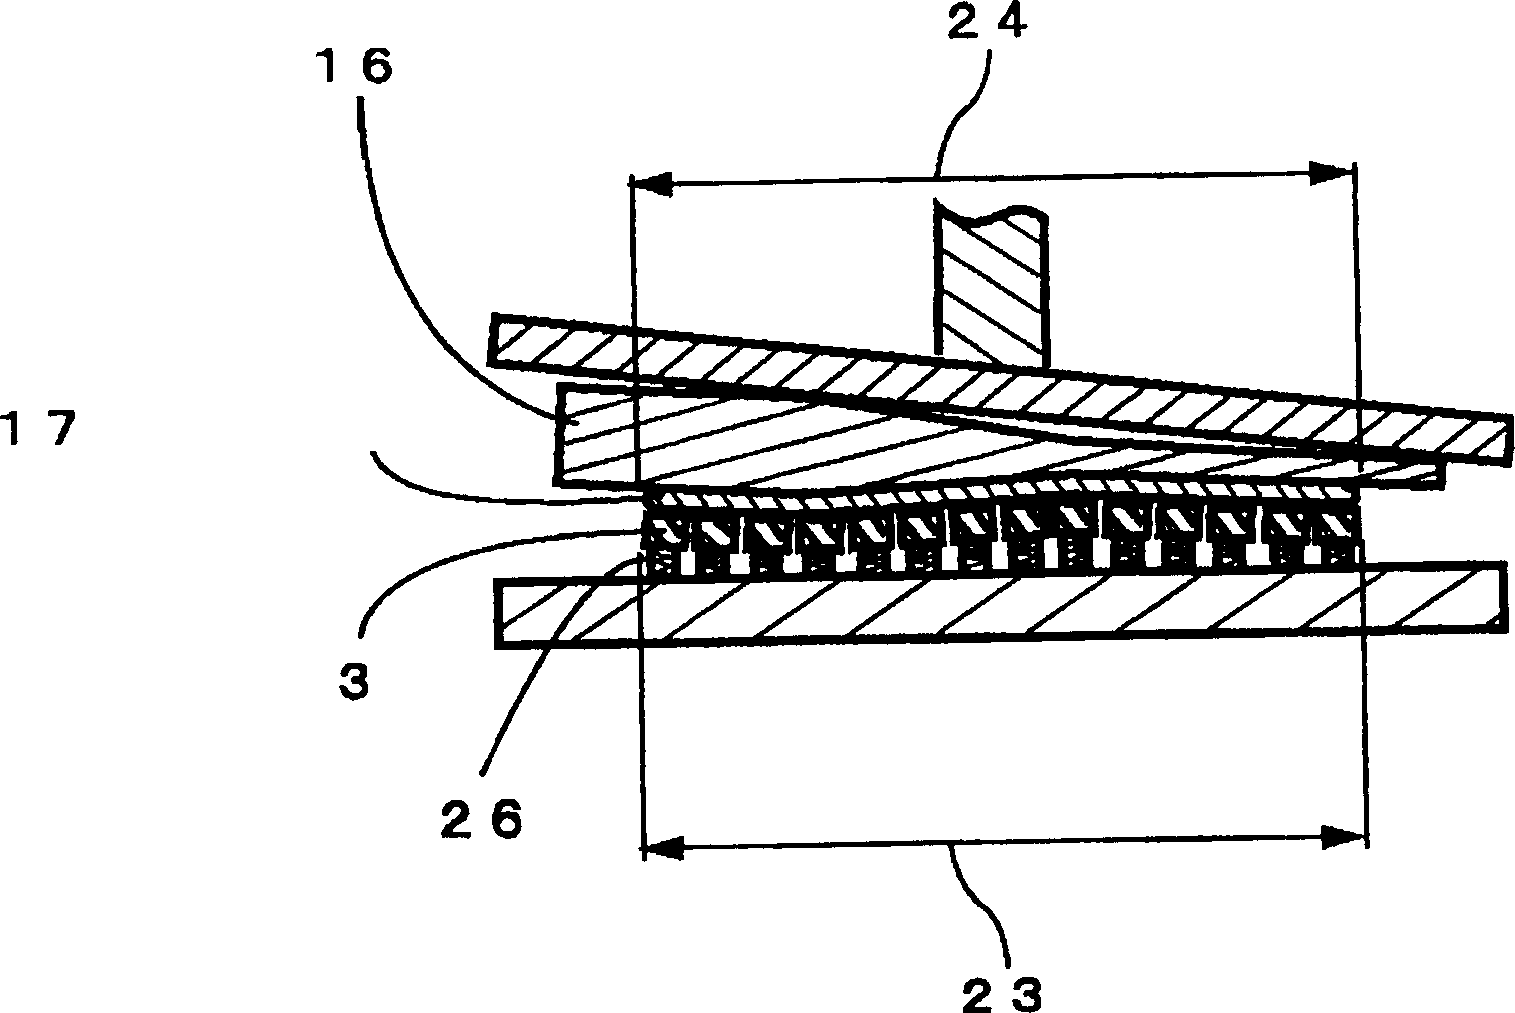 Handle of golf ball brassy manufacture and manufacturing device